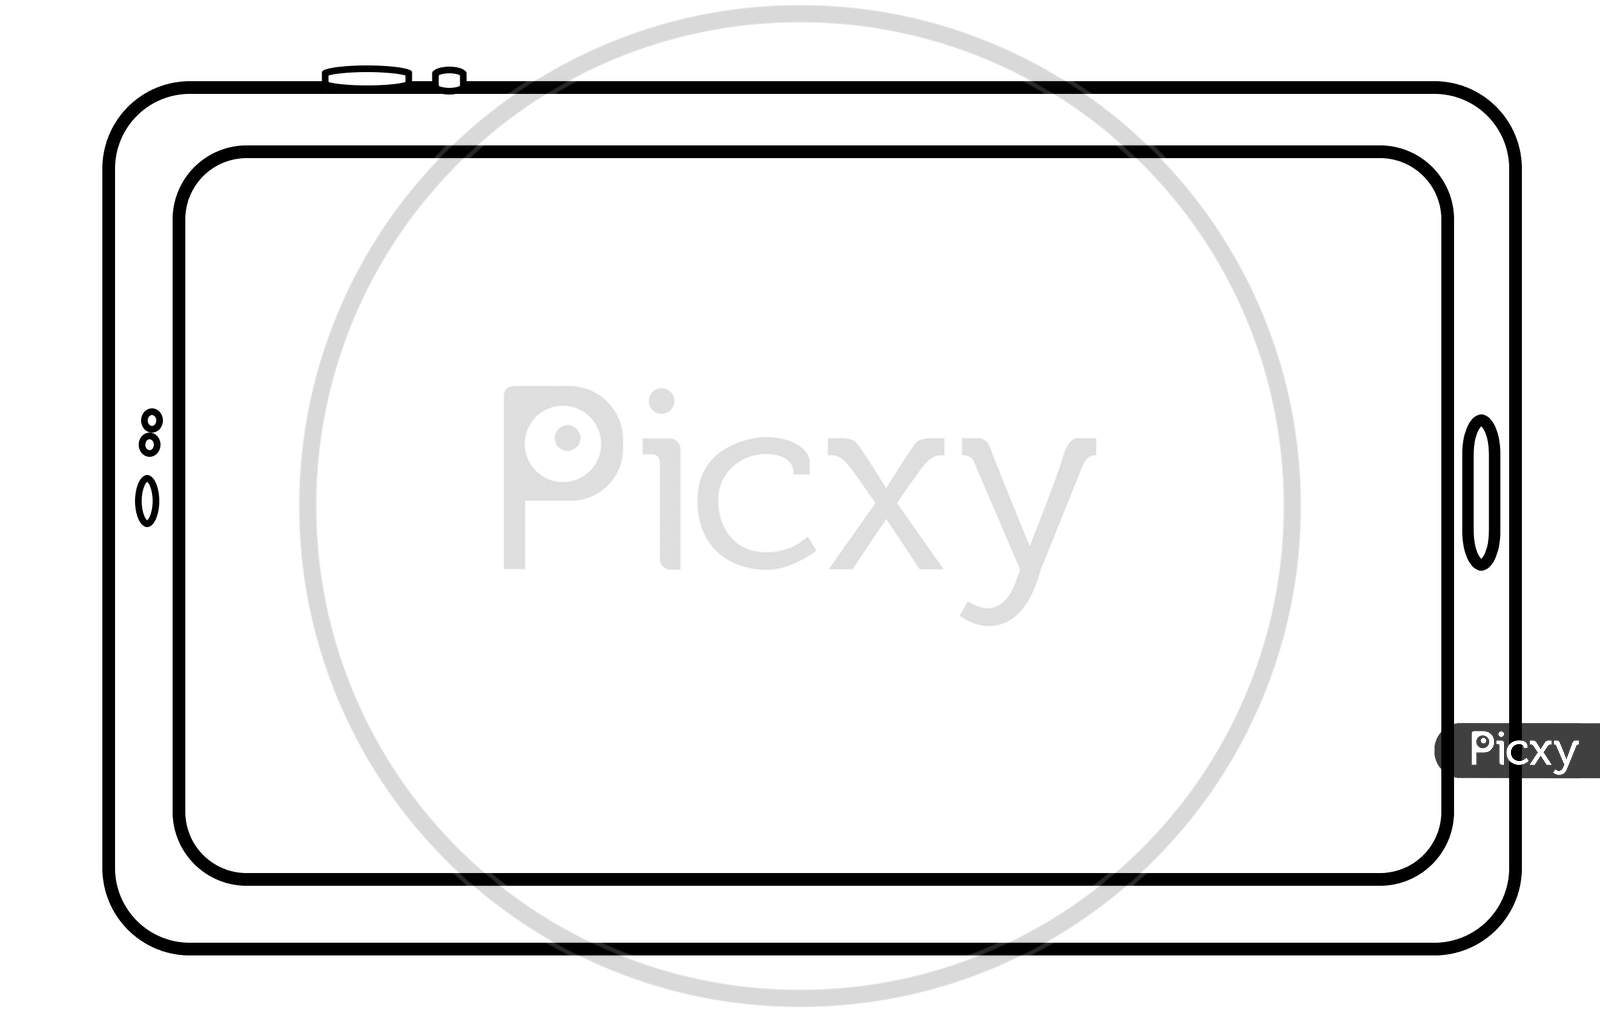 Mobile Frame Design With White Background.